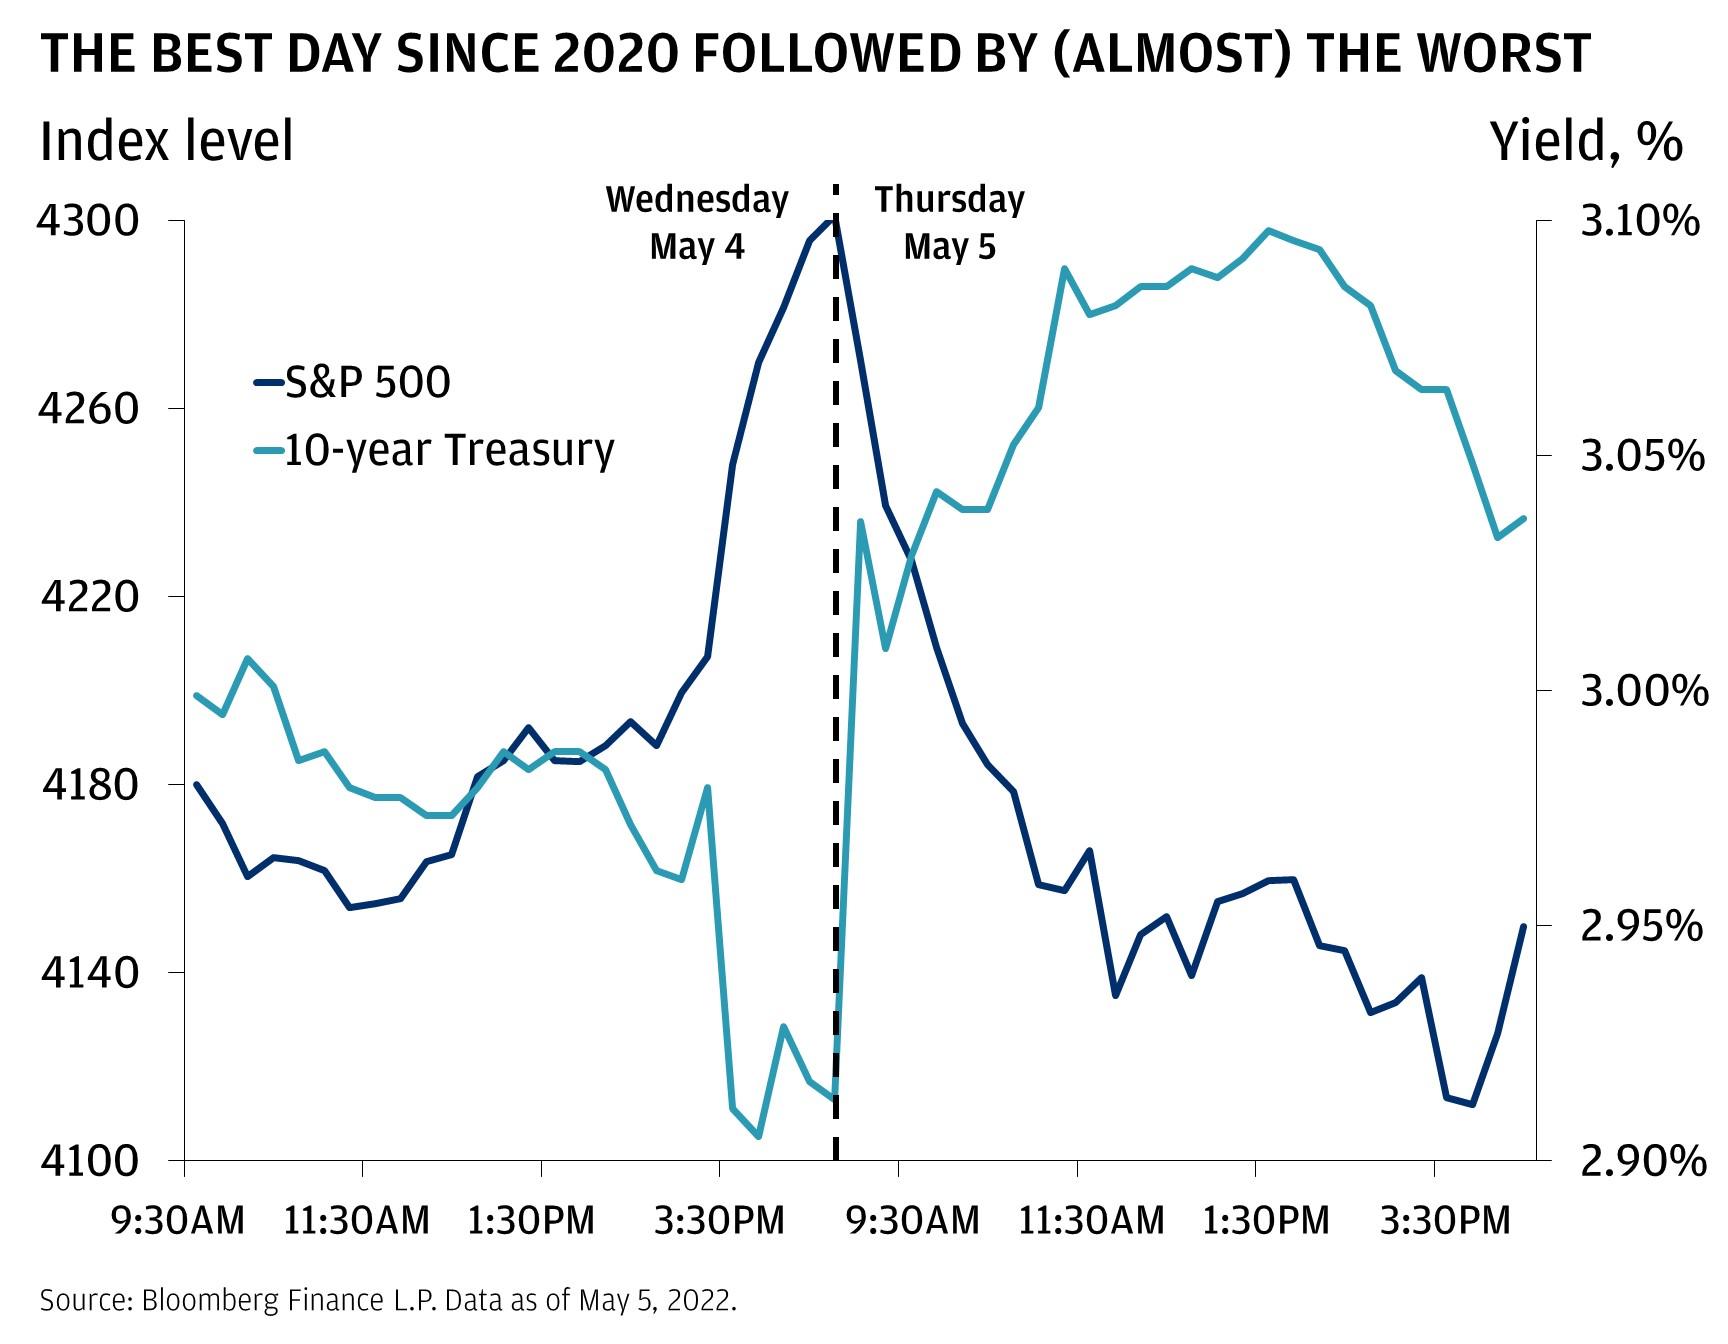 This chart shows the intraday data for the S&P 500 Index level and 10-year Treasury yield through May 4 and May 5, 2022.